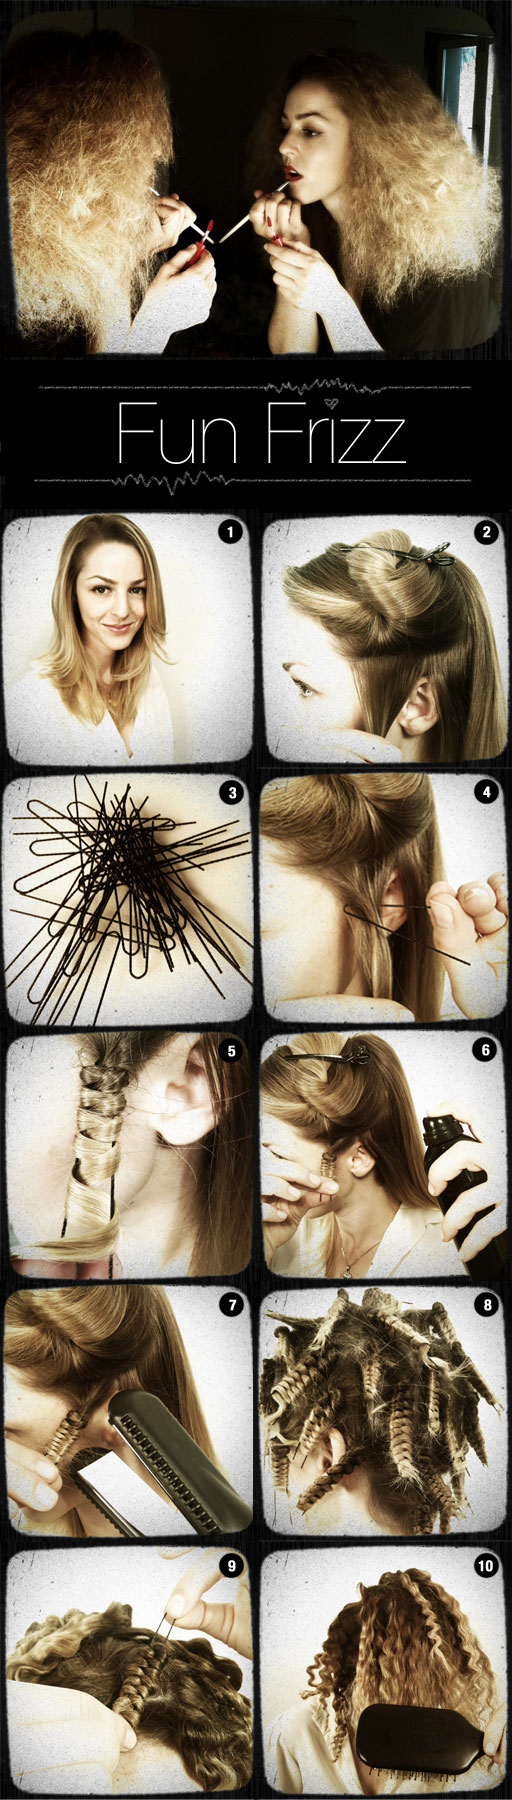 20+ Spooky Halloween Hairstyles and Hair Accessories You Can DIY